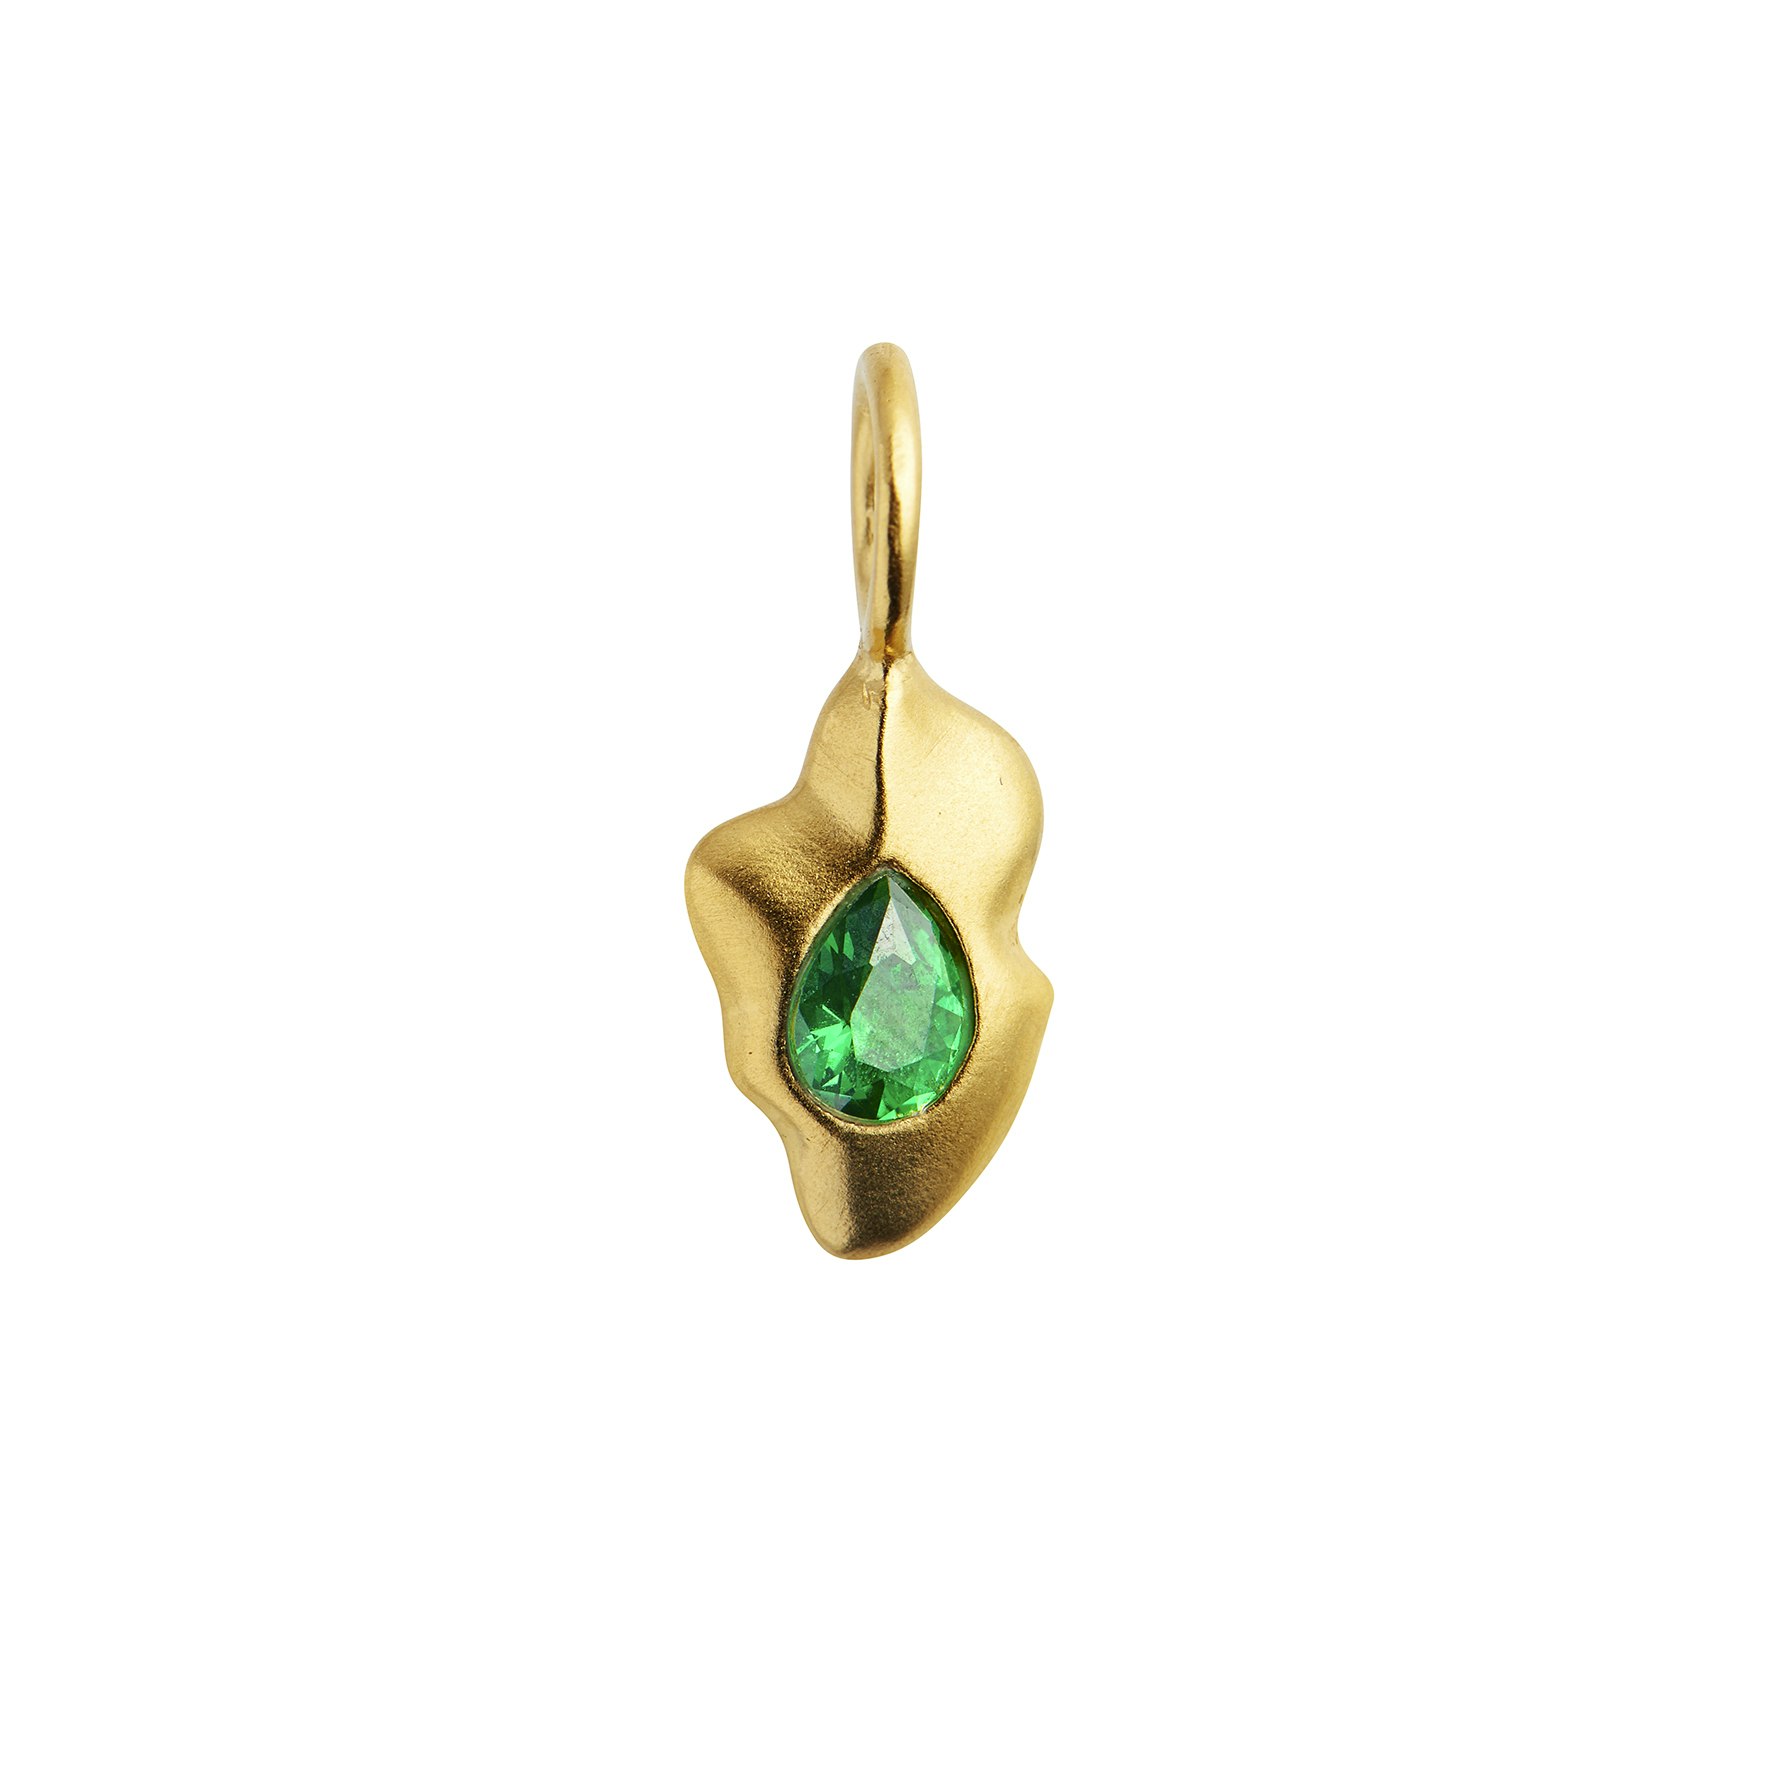 Glimpse Pendant With Green Stone van STINE A Jewelry in Verguld-Zilver Sterling 925